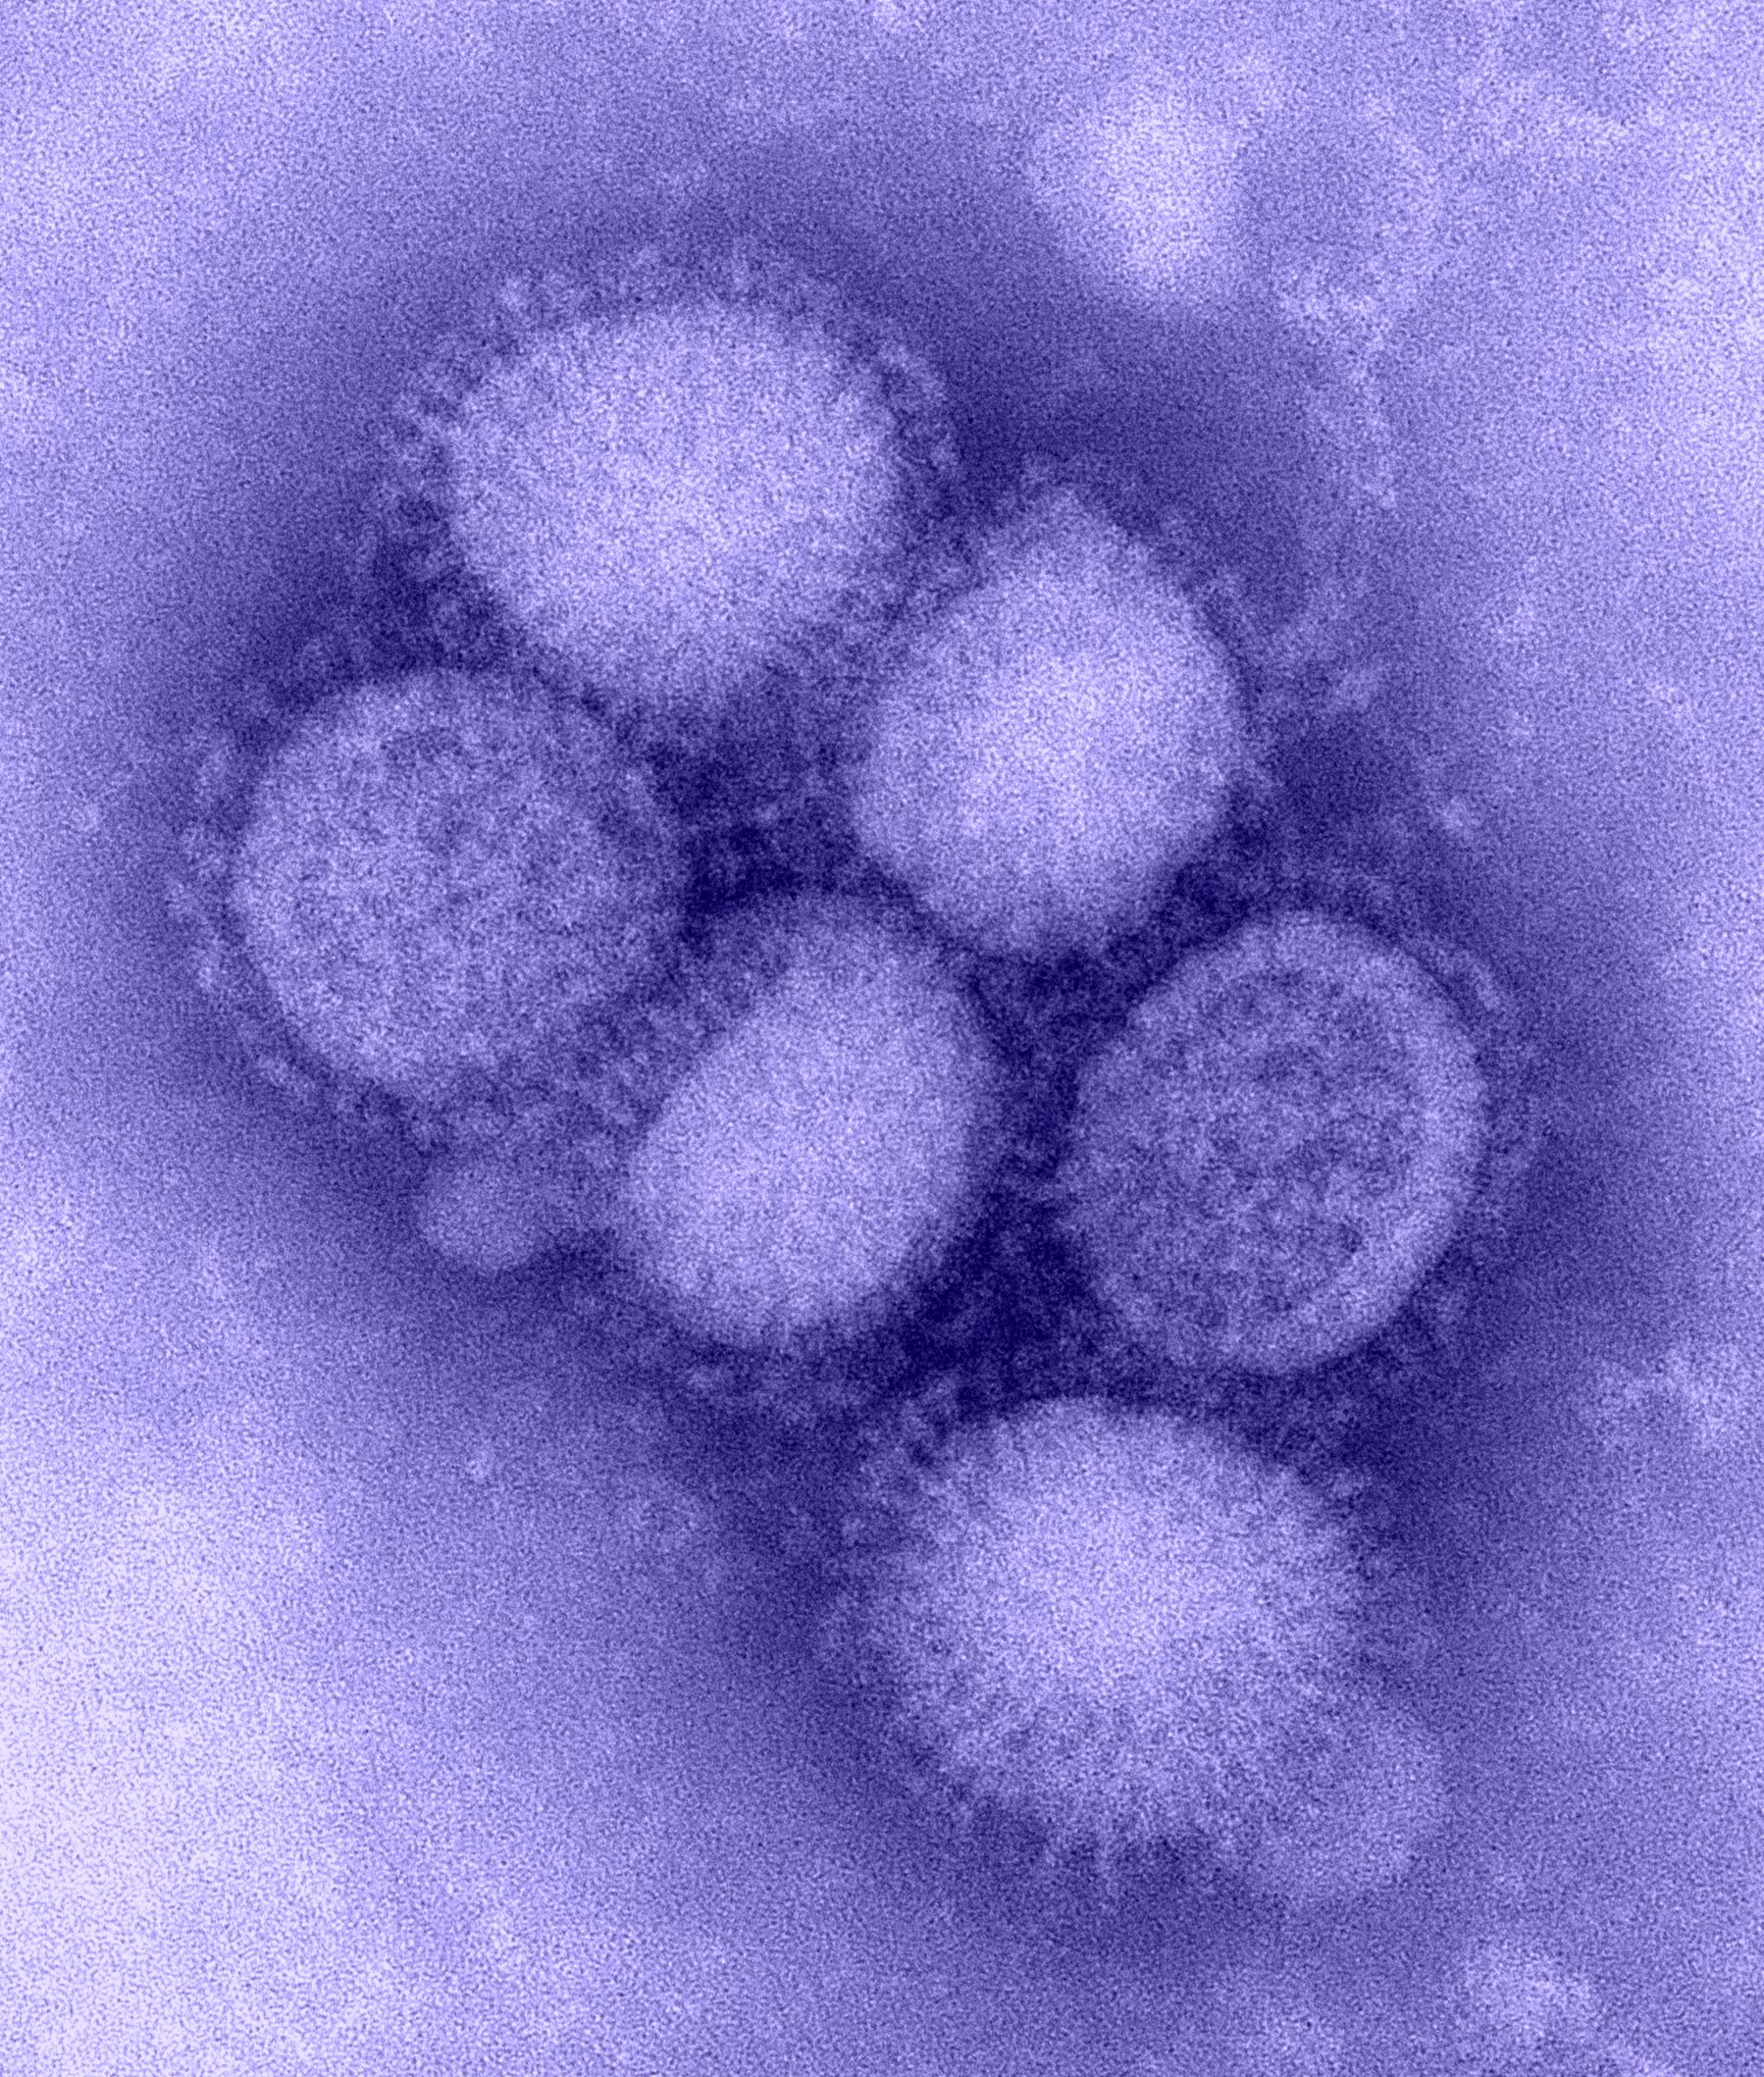 A microscope image of H1N1 influenza virus particles, colored purple.